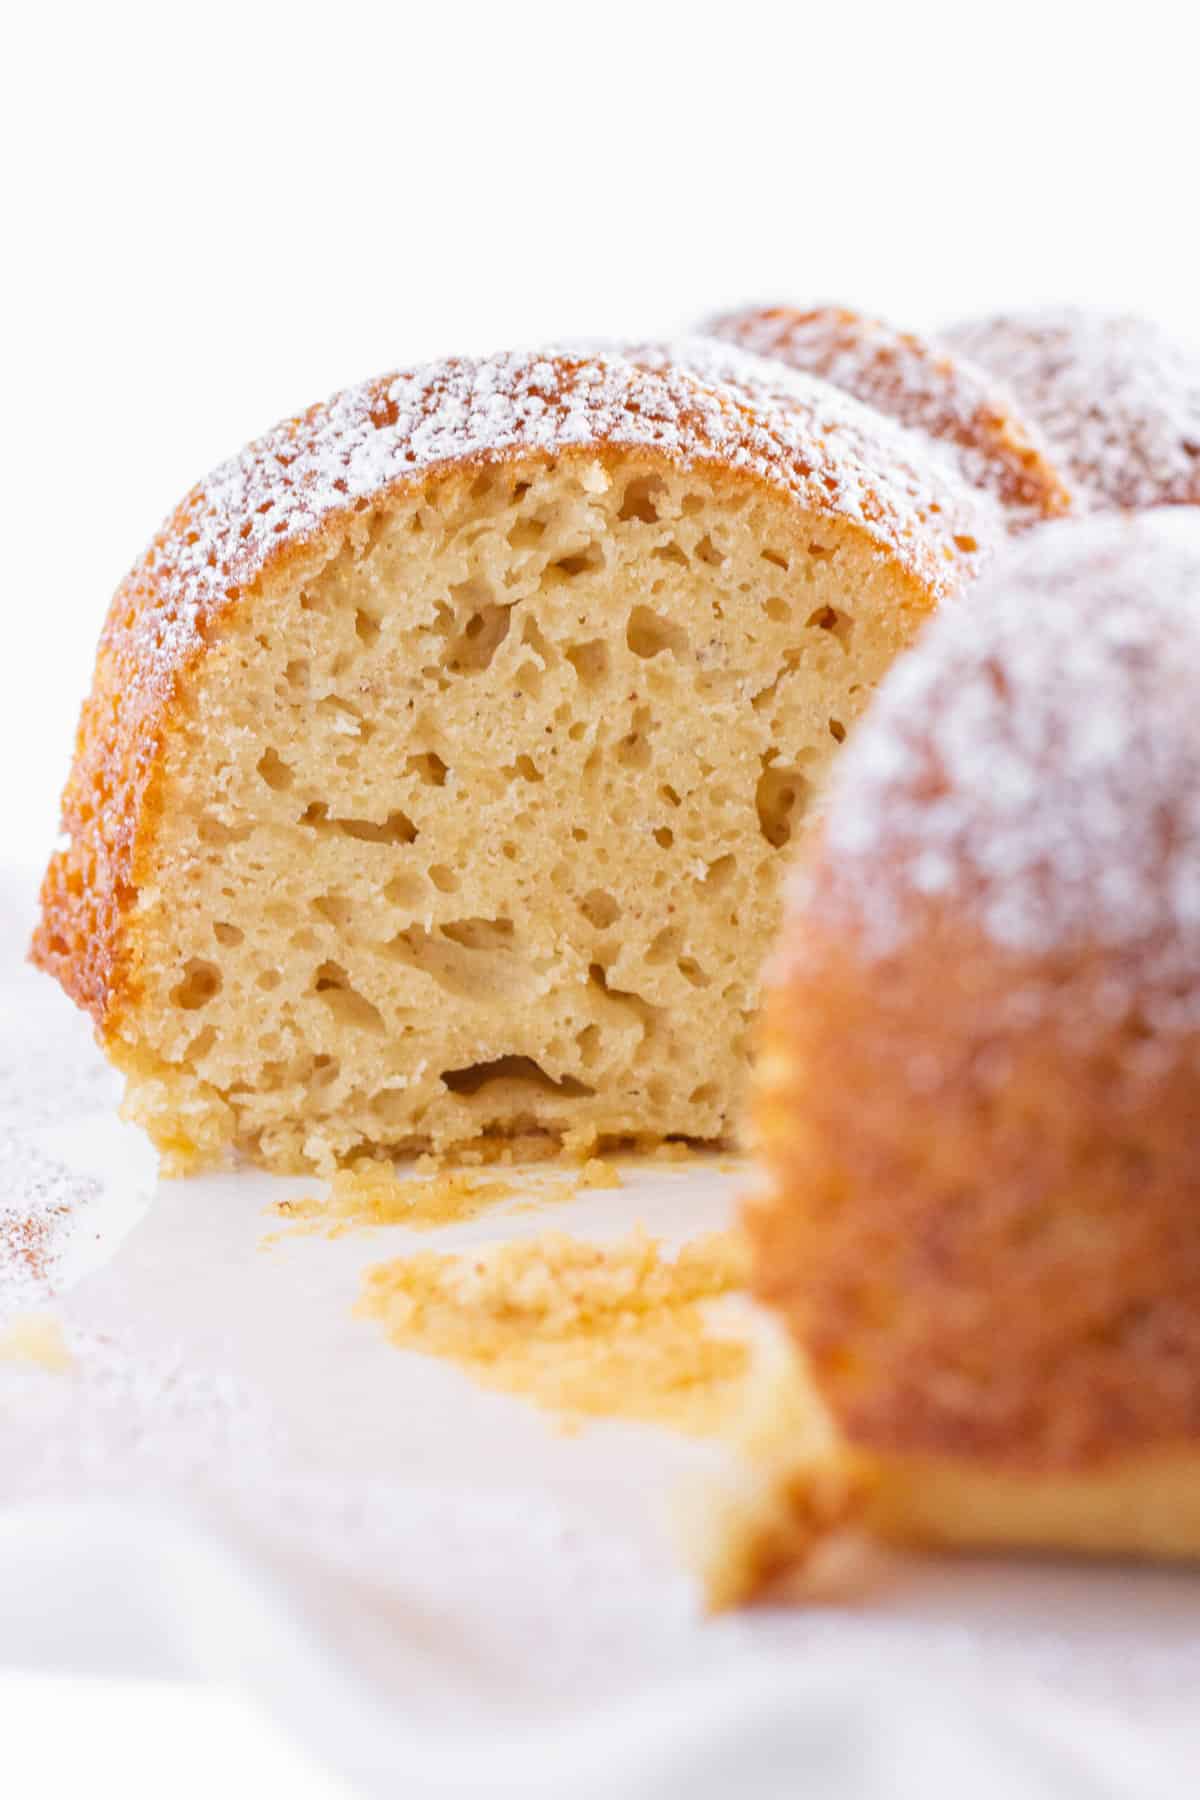 Looking into the middle of the Eggnog Bundt Cake.